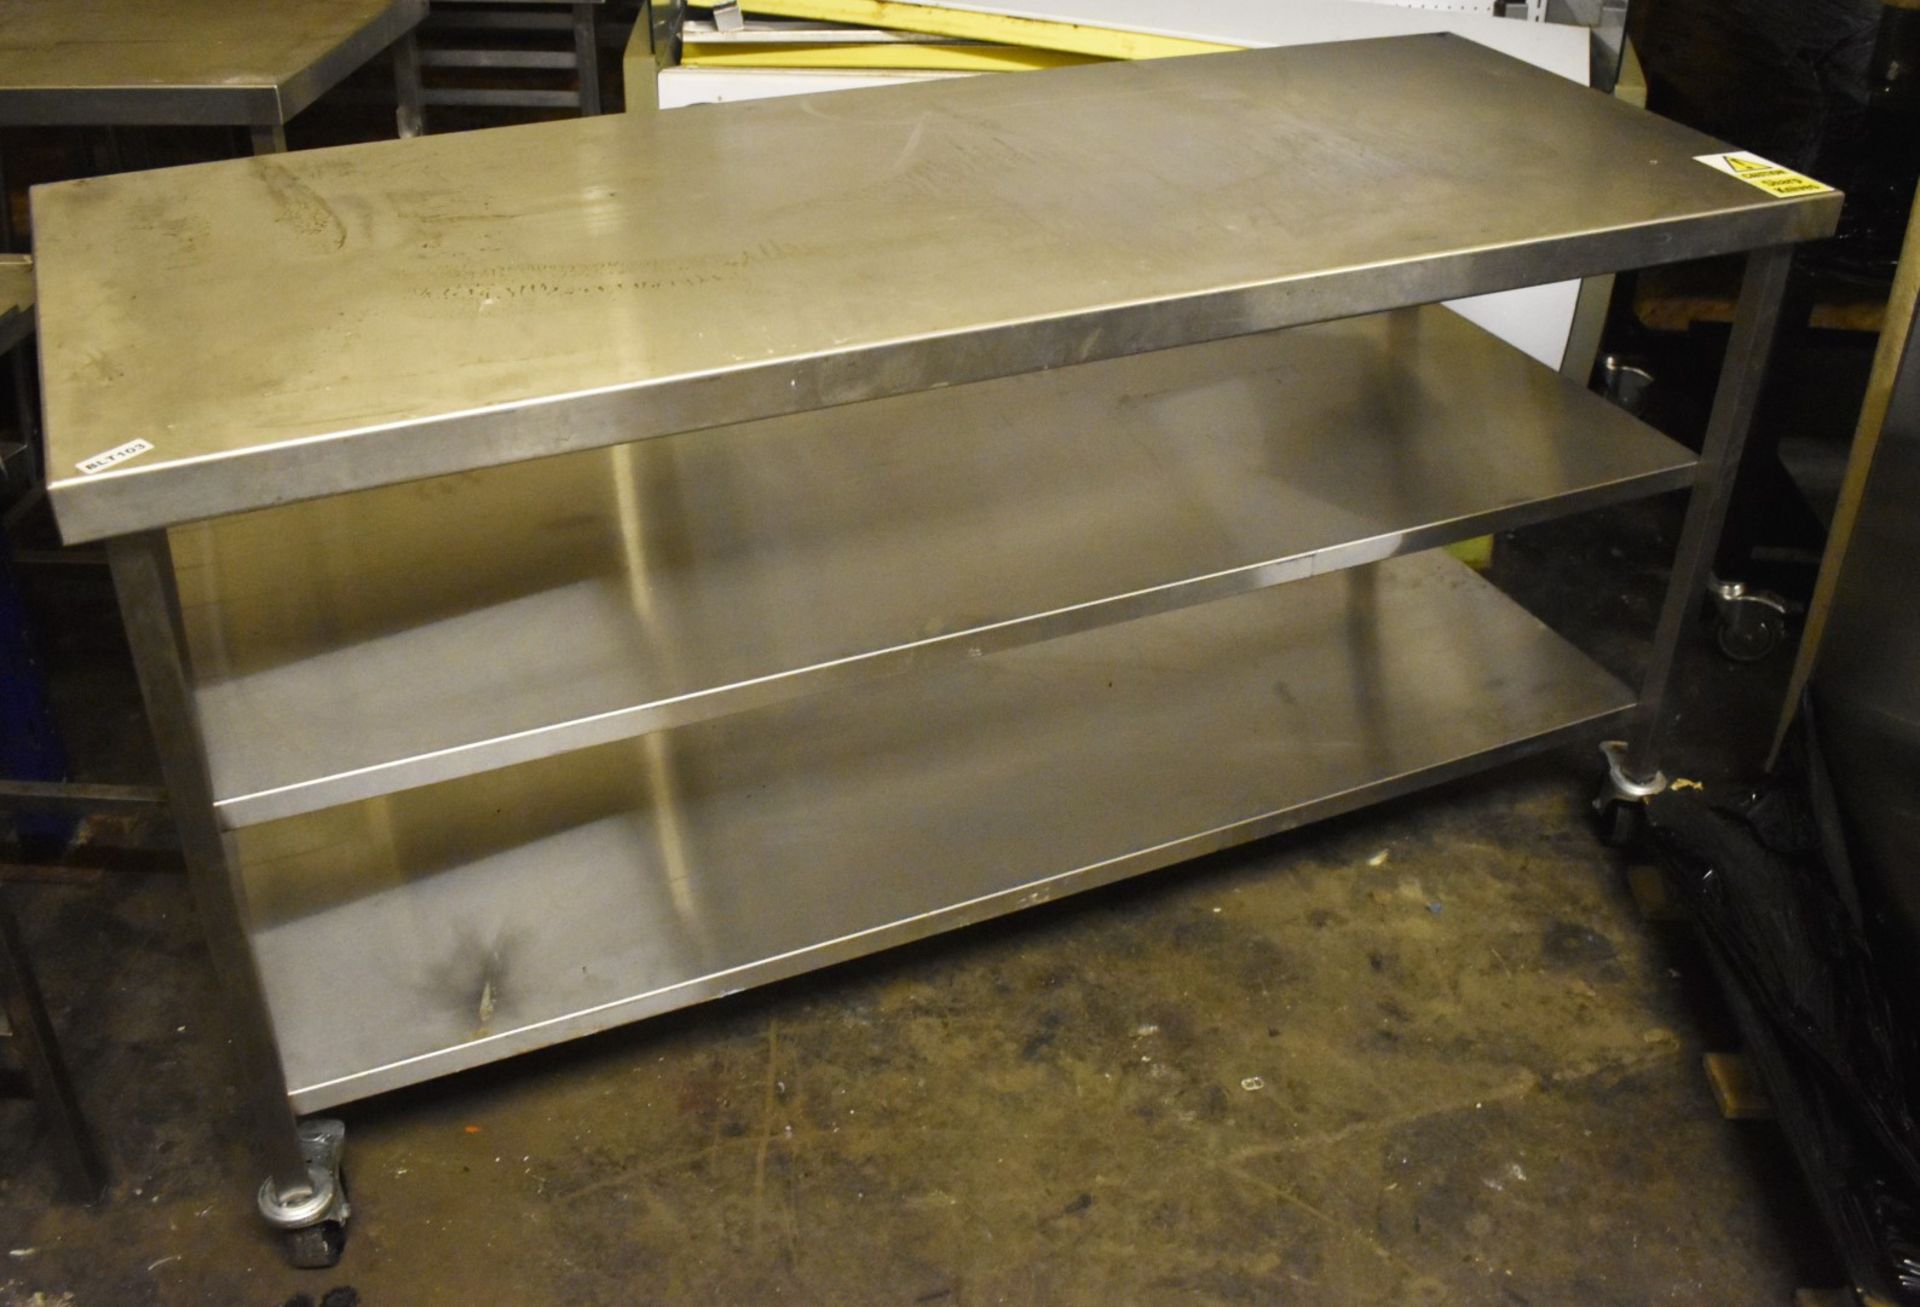 1 x Stainless Steel Prep Bench With Undershleves and Castors - L165 x D65 cms - Ref BLT103 -